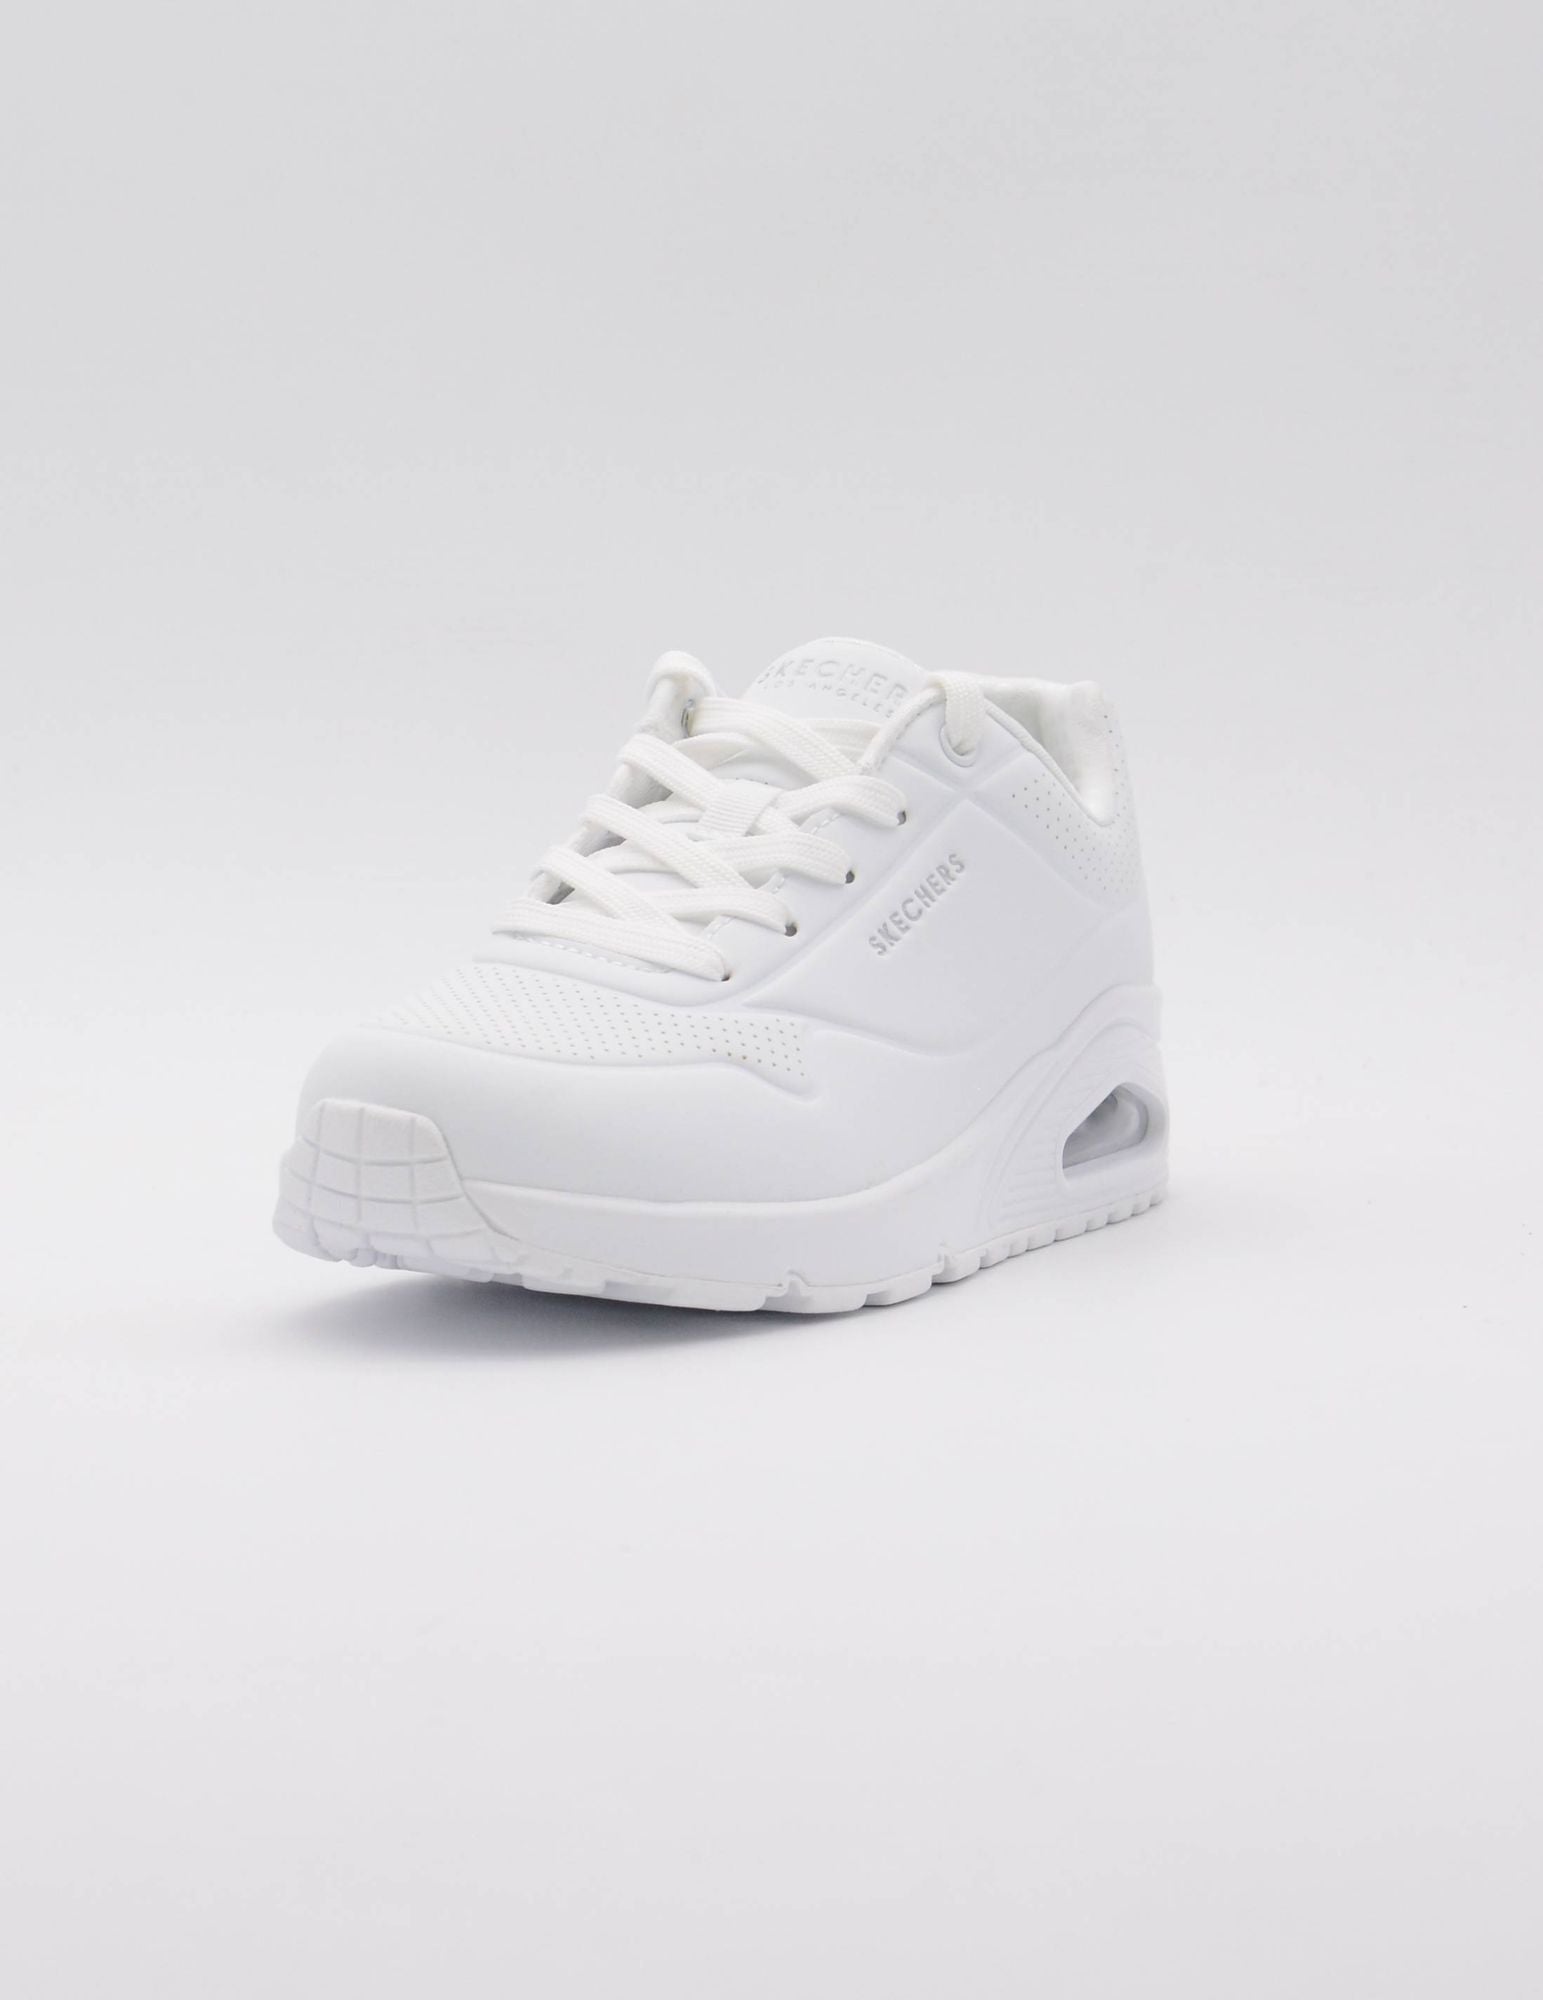 SKECHERS DEPORTIVO Uno - Stand on Air BLANCO